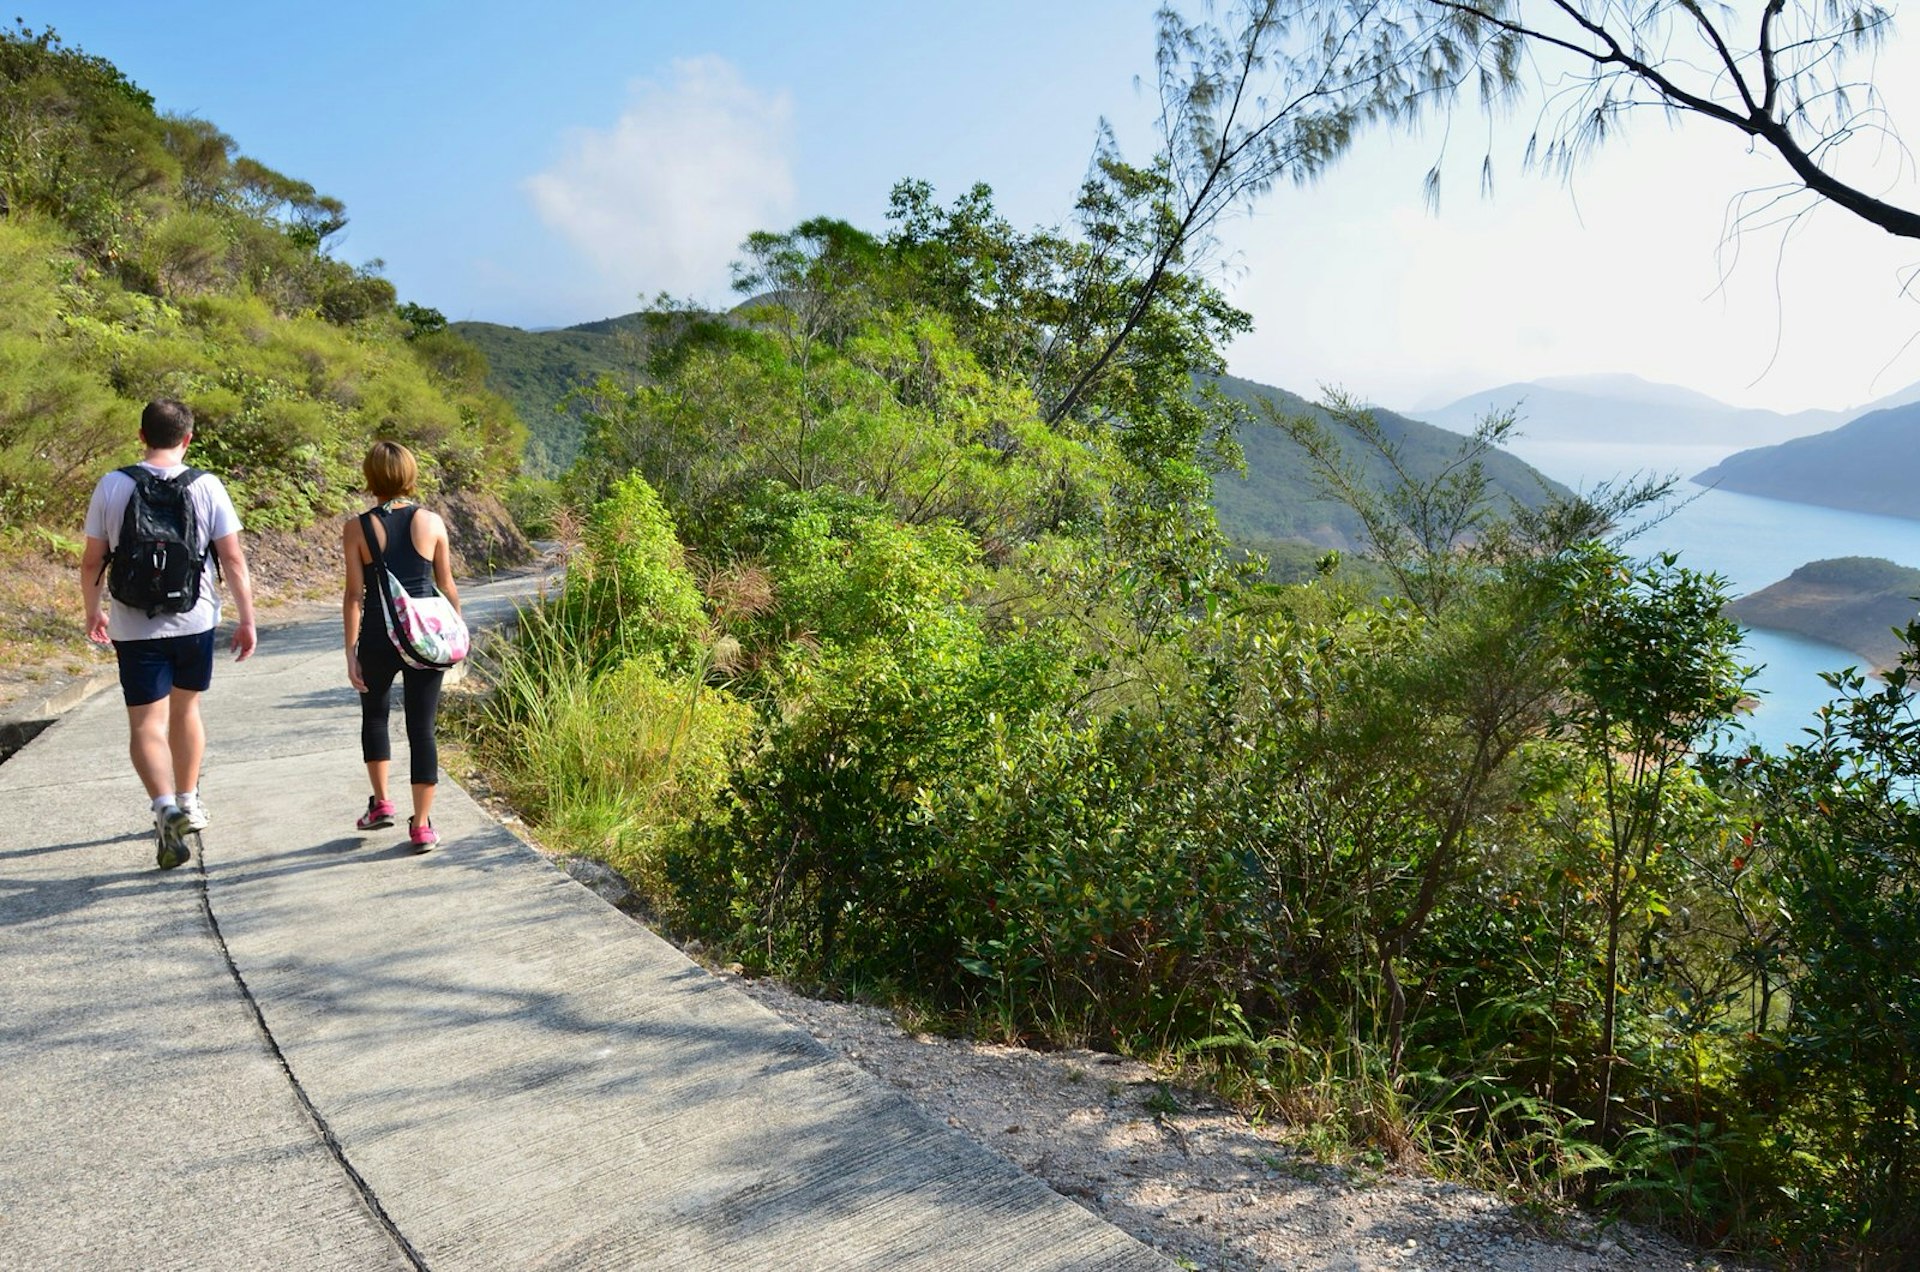 The 100km-long MacLehose Trail offers some of Hong Kong's best hiking © Stefan Irvine / Getty Images